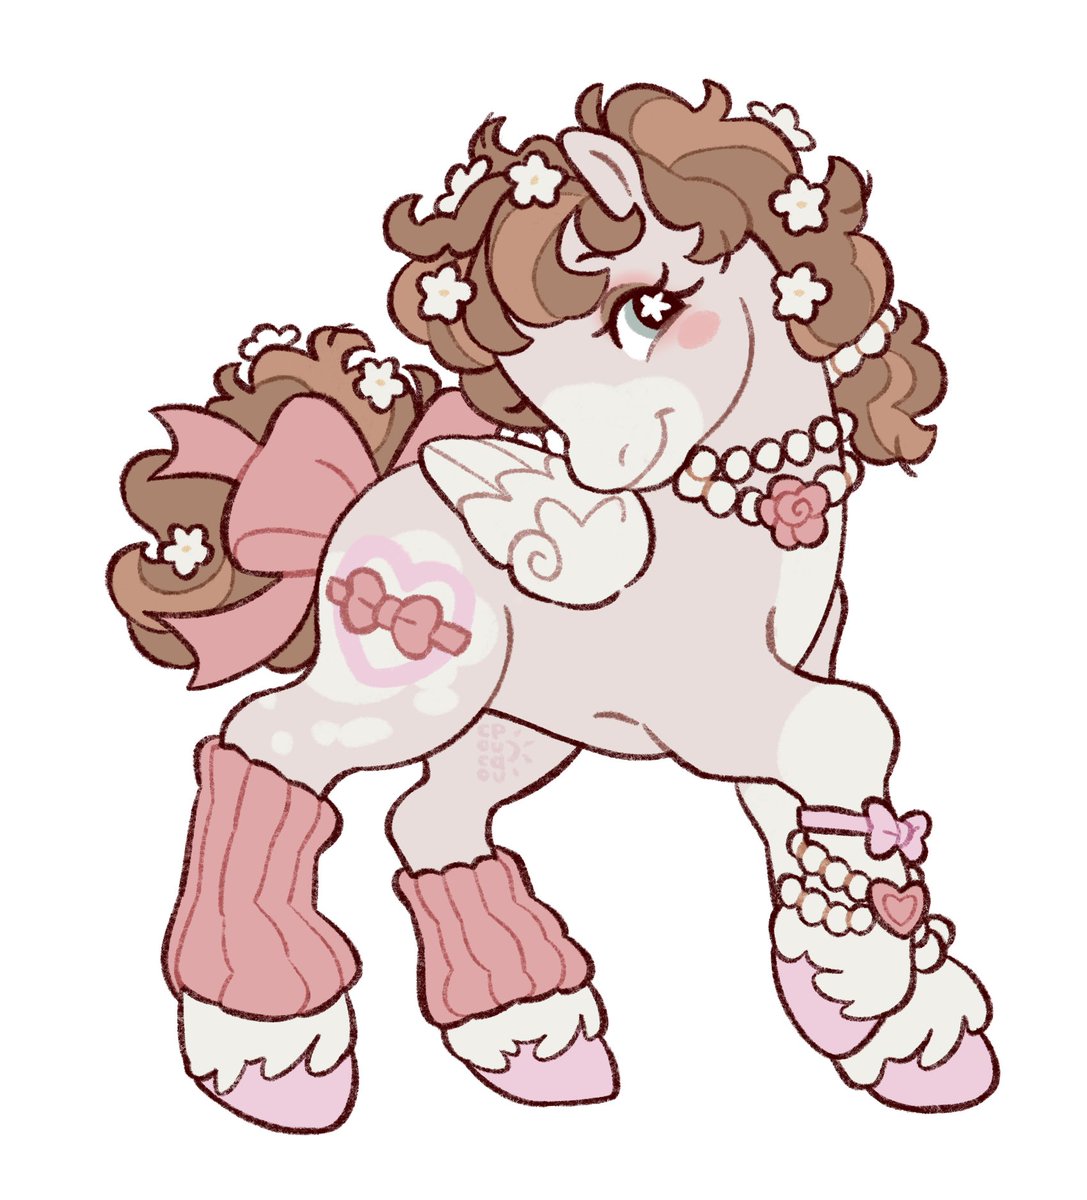 WOAH unexpected collab commission bc one of my bestest besties (@p0nyplanet) did the original design :3c 💝🎀🧸